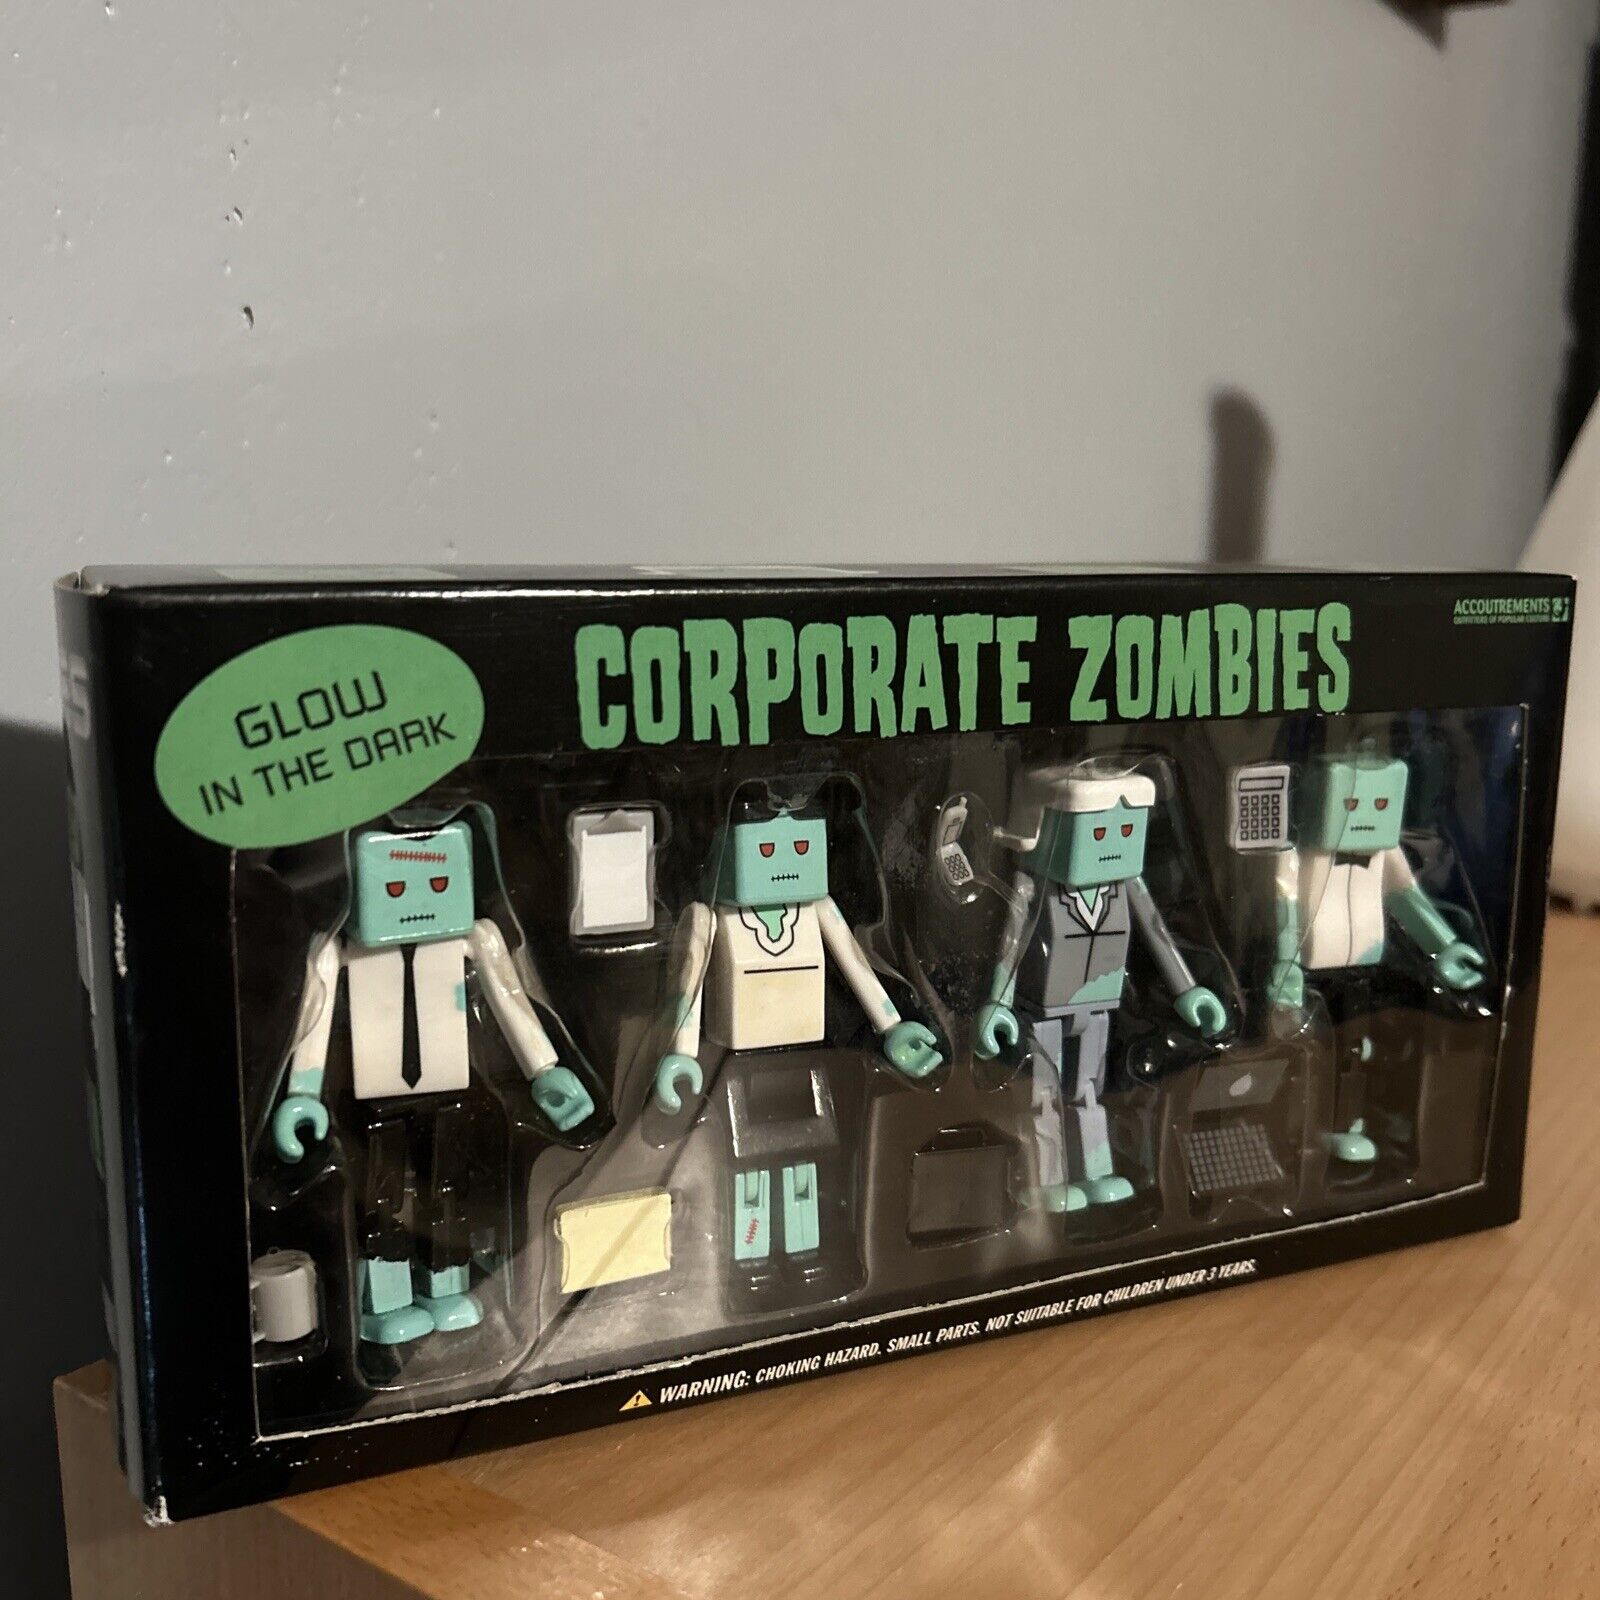 THE CUBES Corporate Zombies figures Toy Glow in The Dark ( Accoutrements ) *NEW*